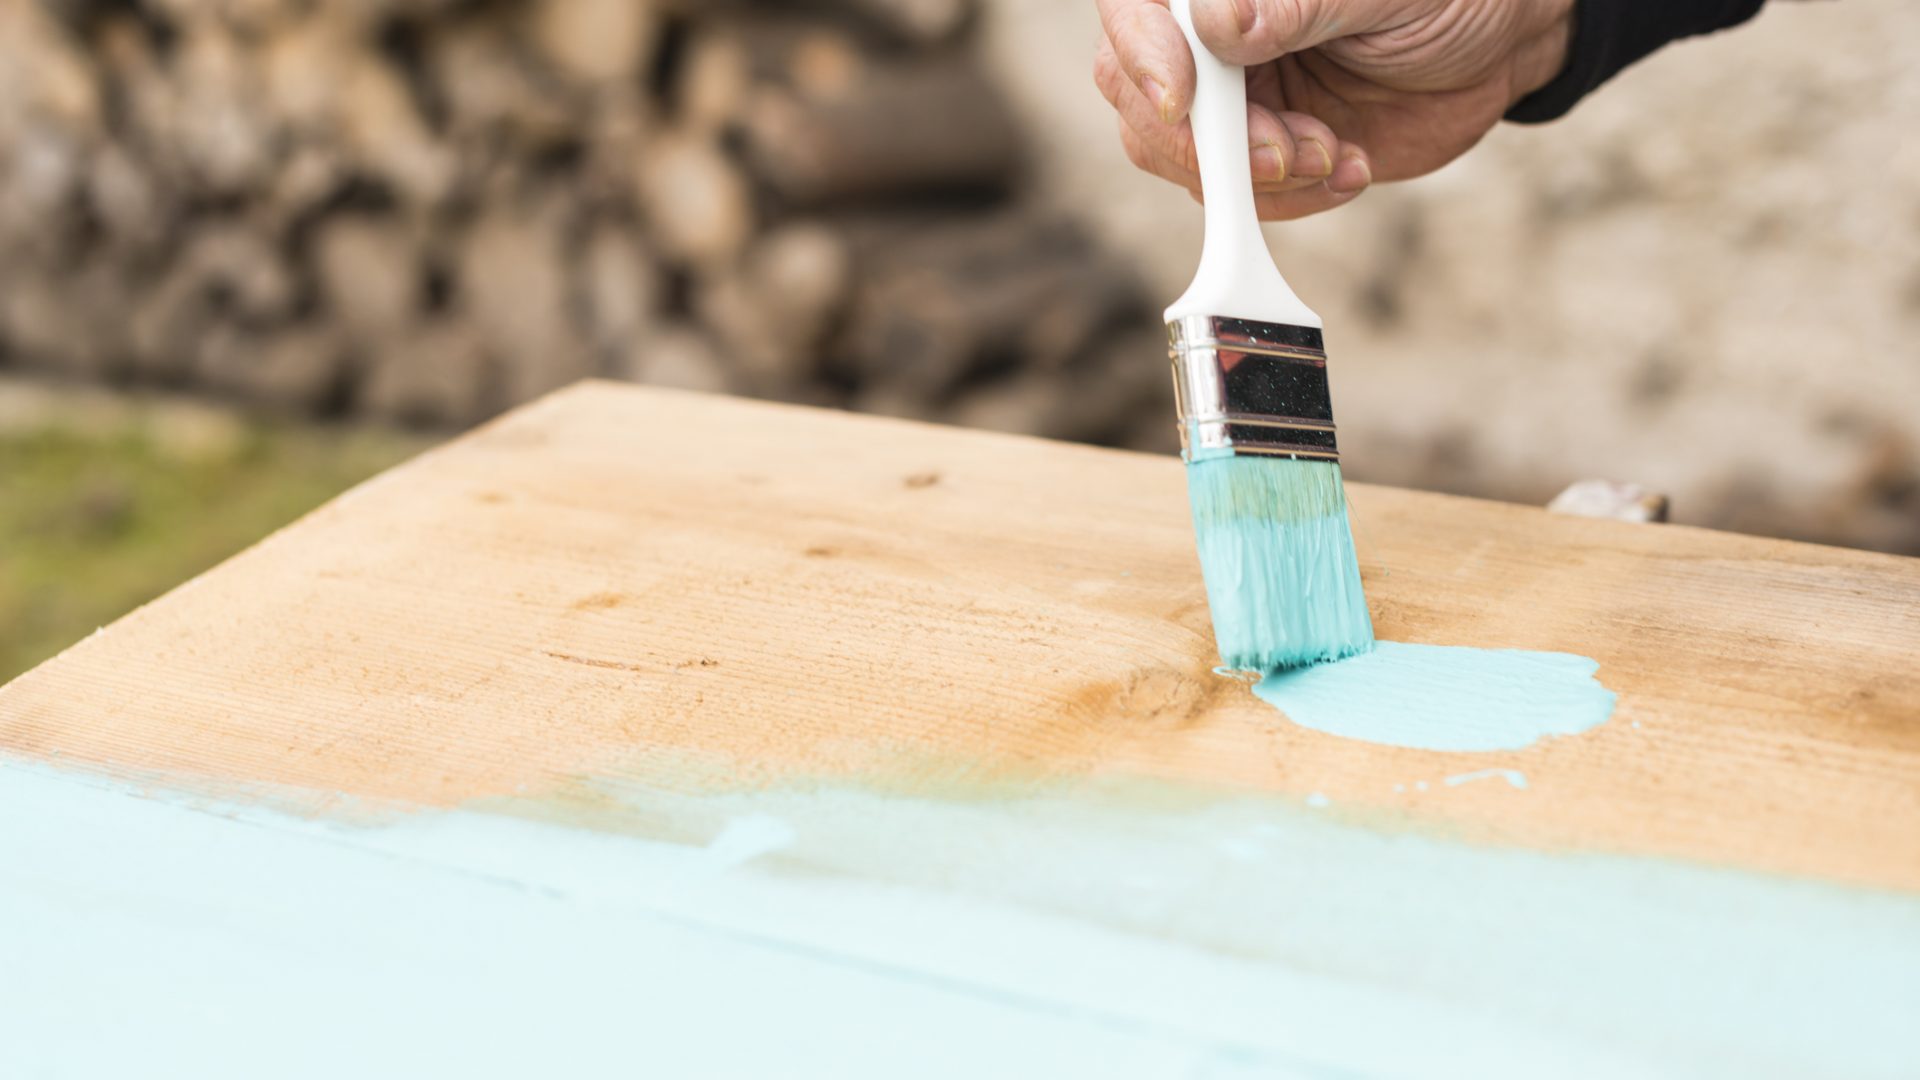 what paint to use for chalk paint